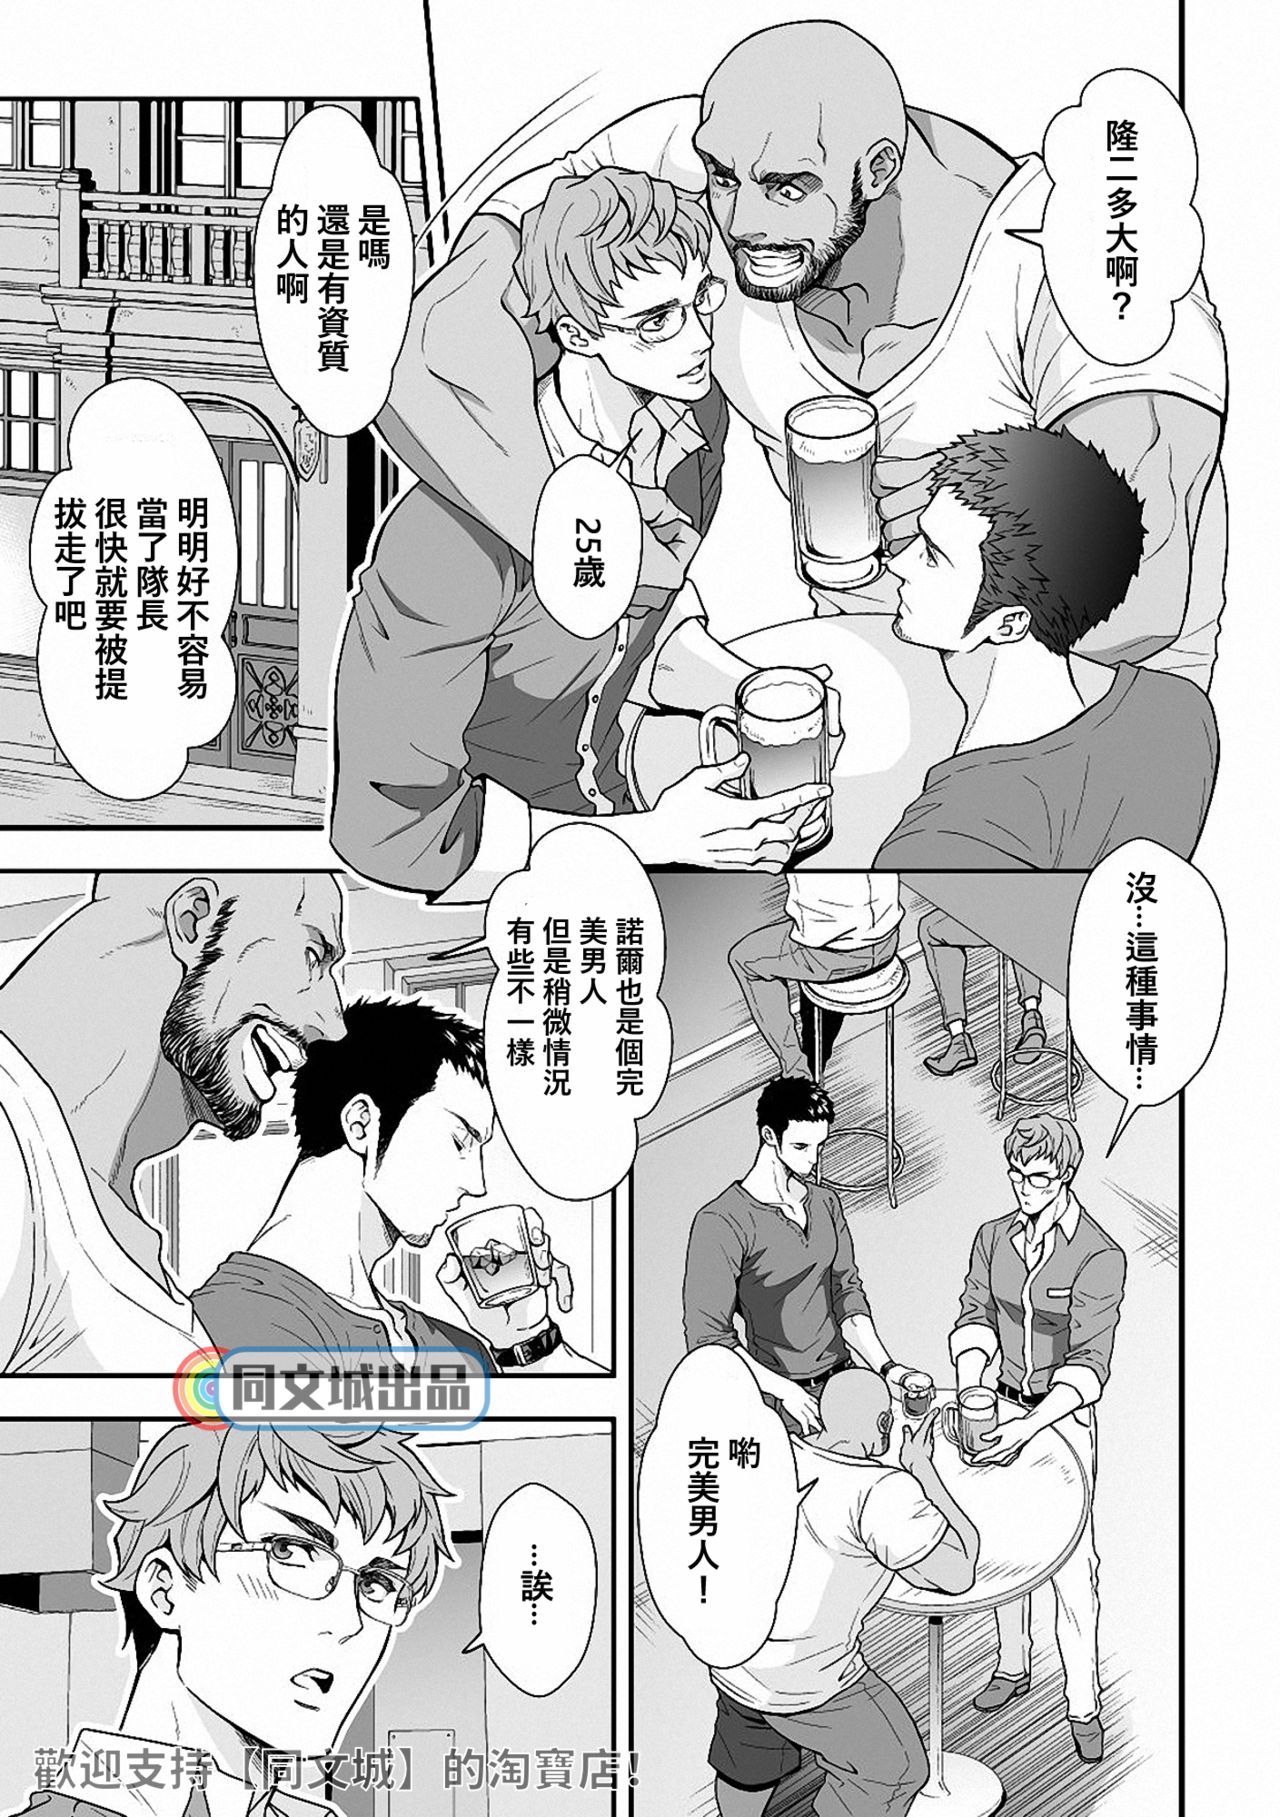 [Unknown (UNKNOWN)] Jouge Kankei 6 | 上下关系6 [Chinese] [同文城] page 32 full